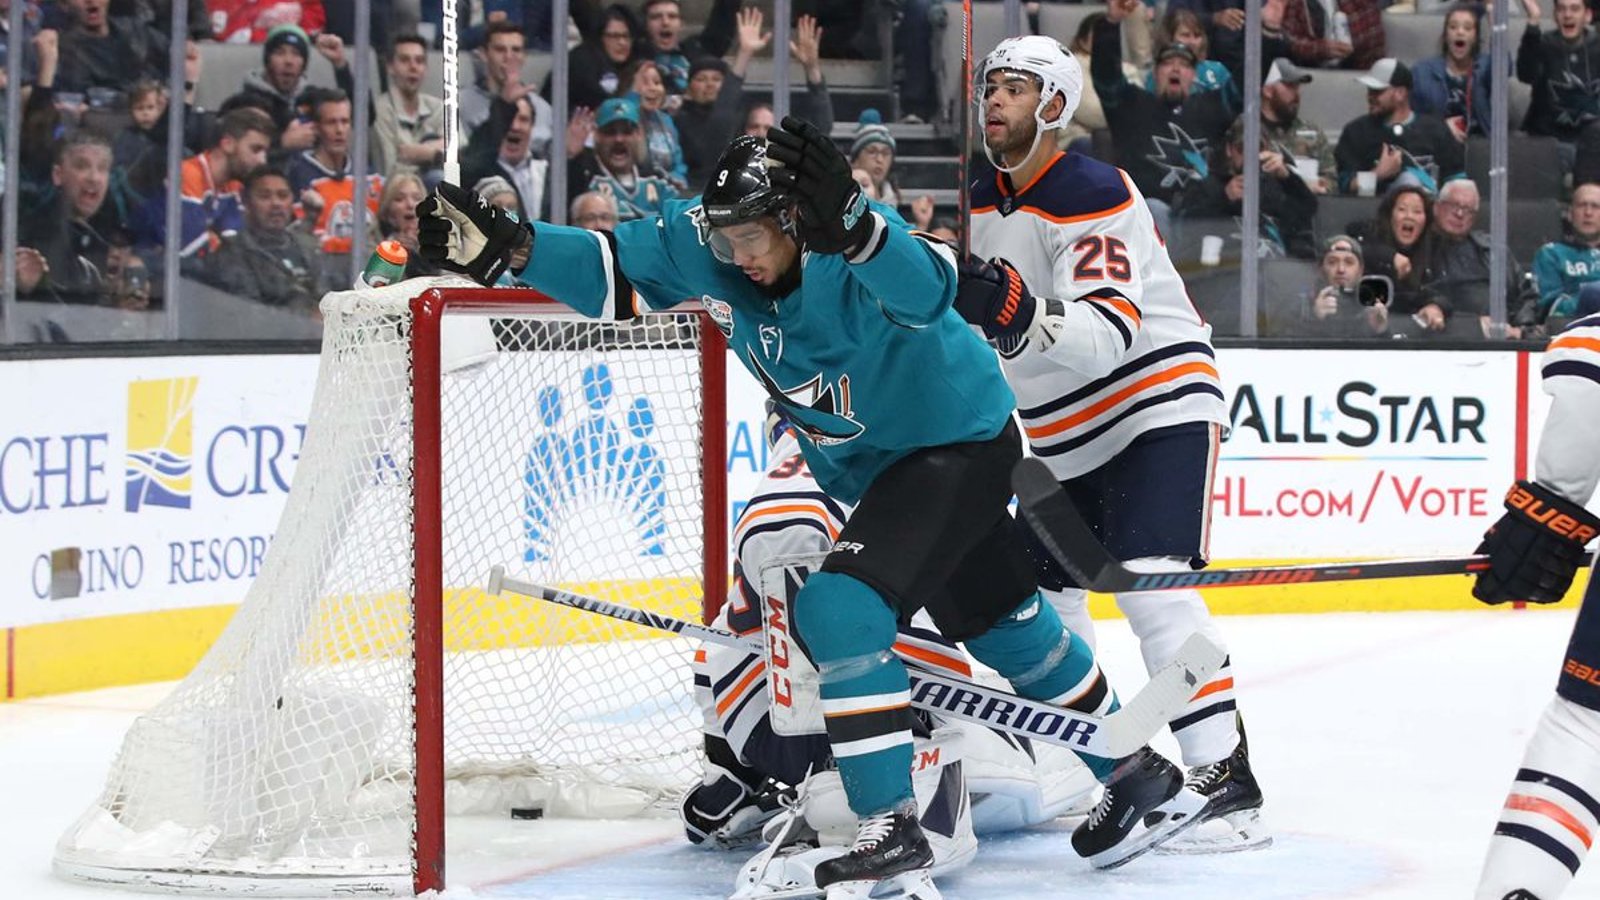 Latest update on Evander Kane’s next contract: “Almost done” says agent